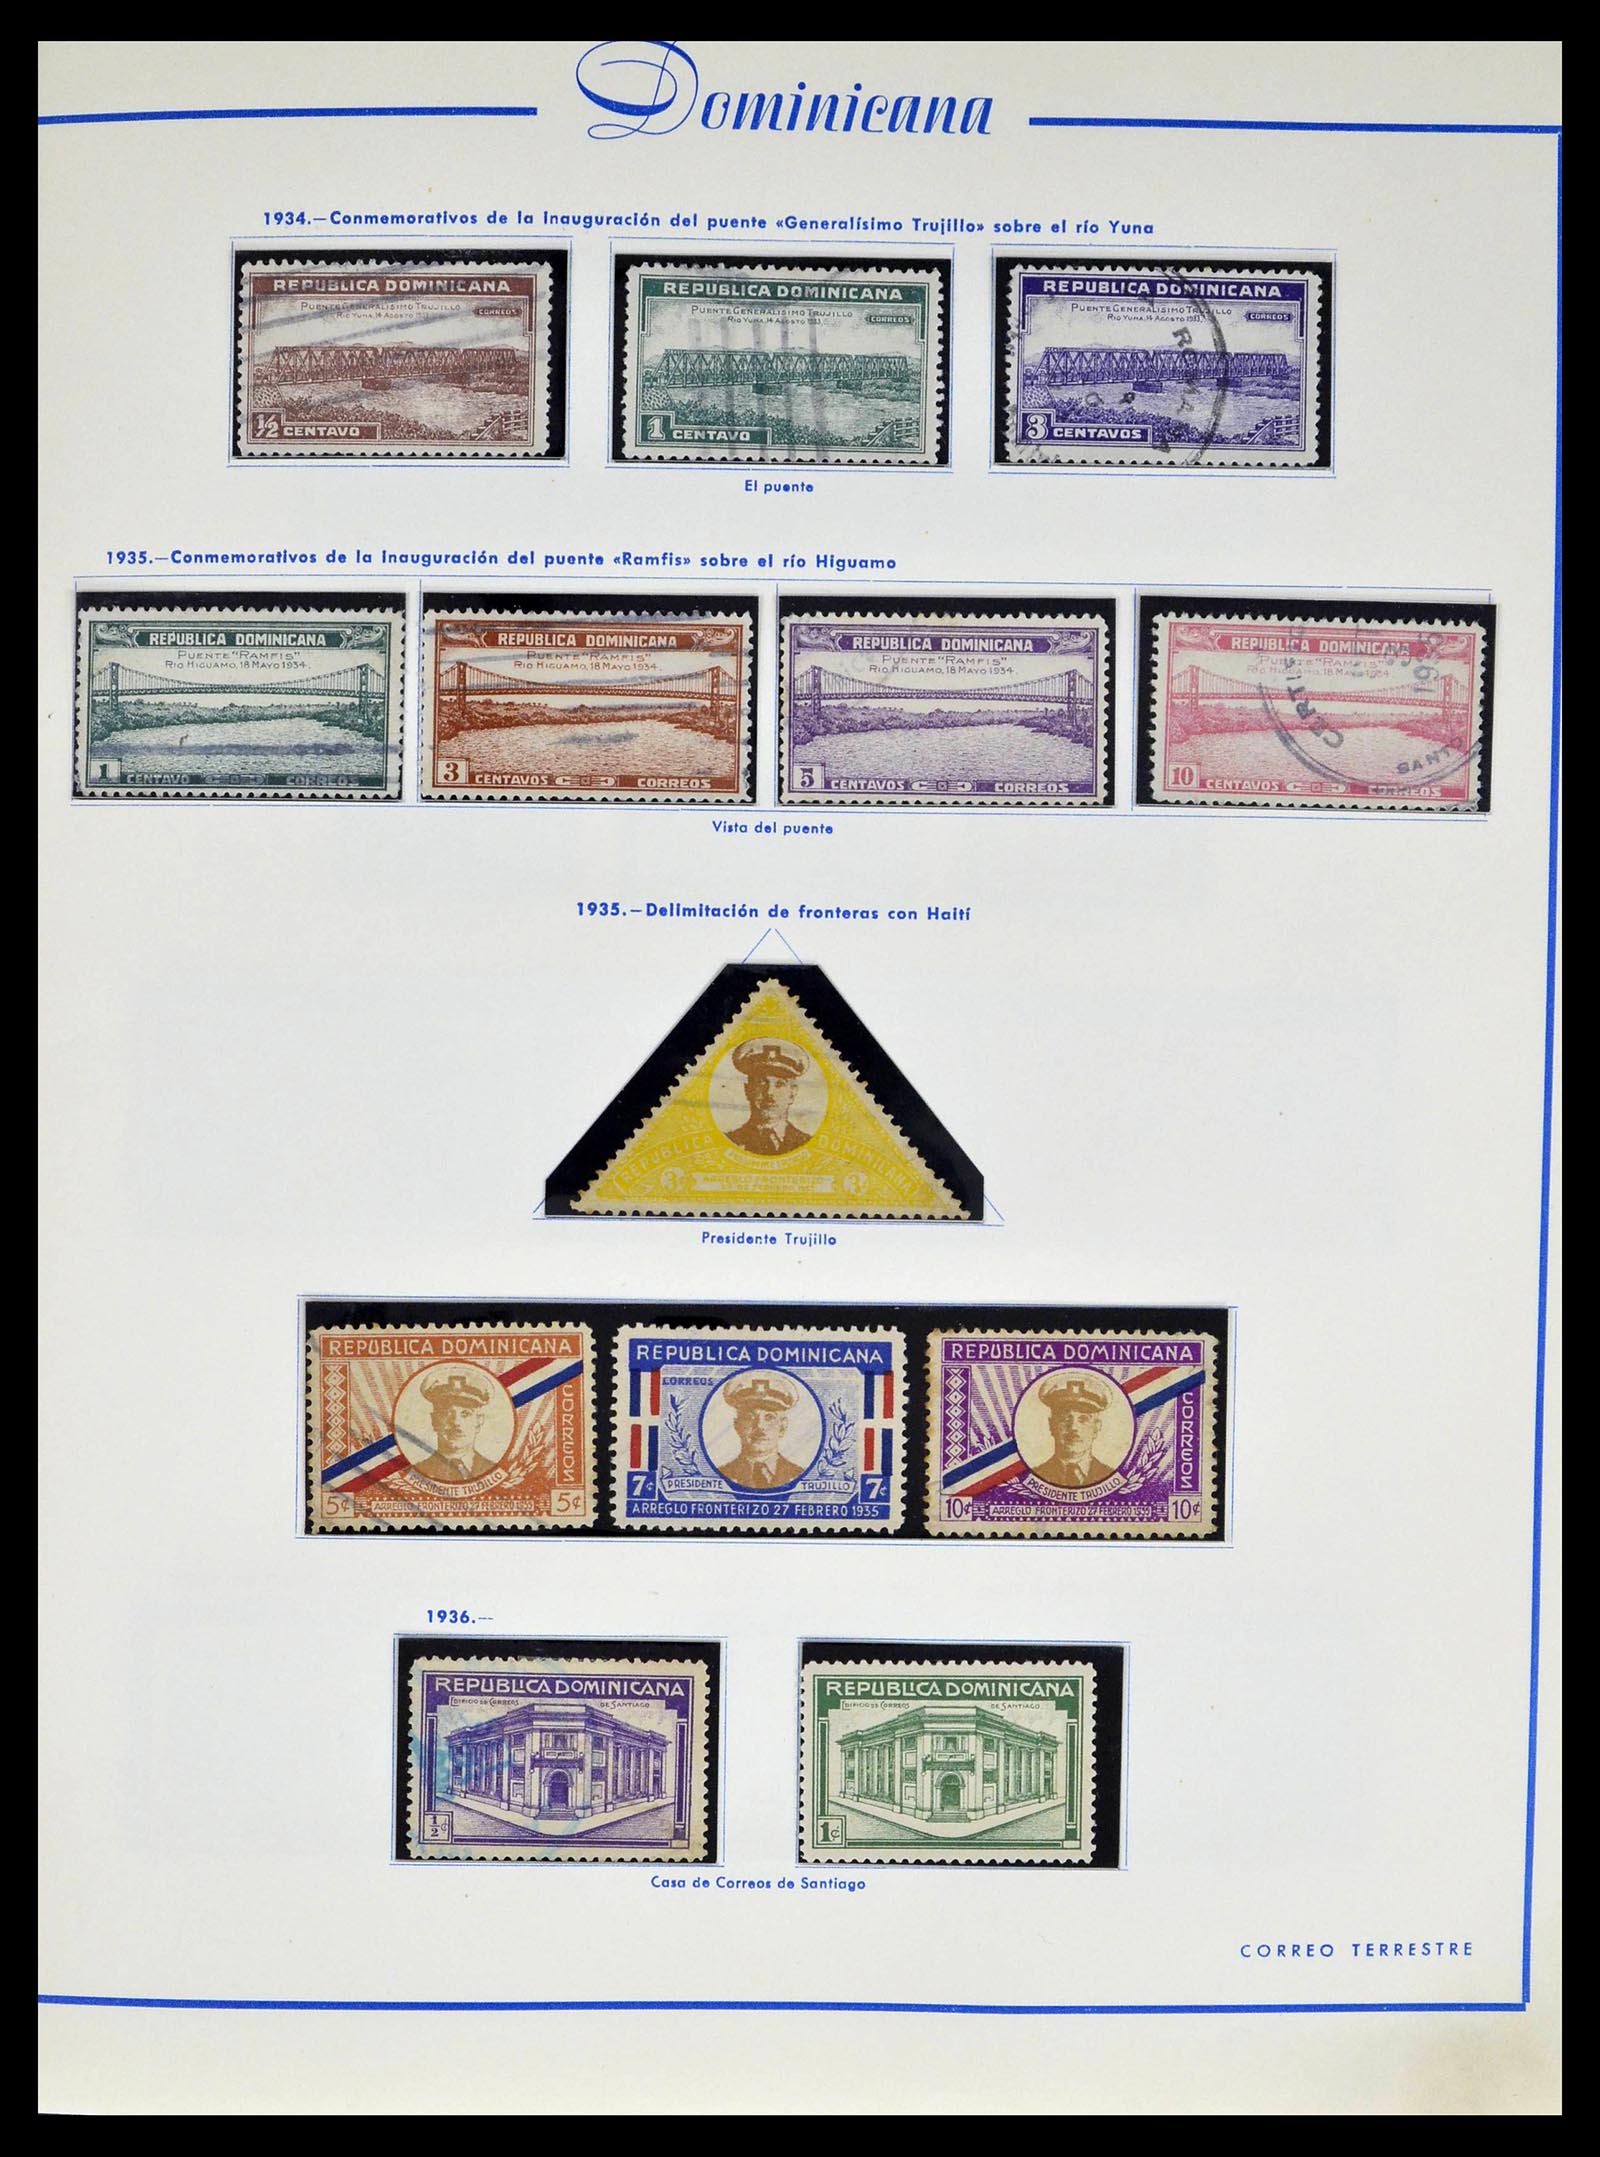 39216 0016 - Stamp collection 39216 Dominican Republic 1870-1982.